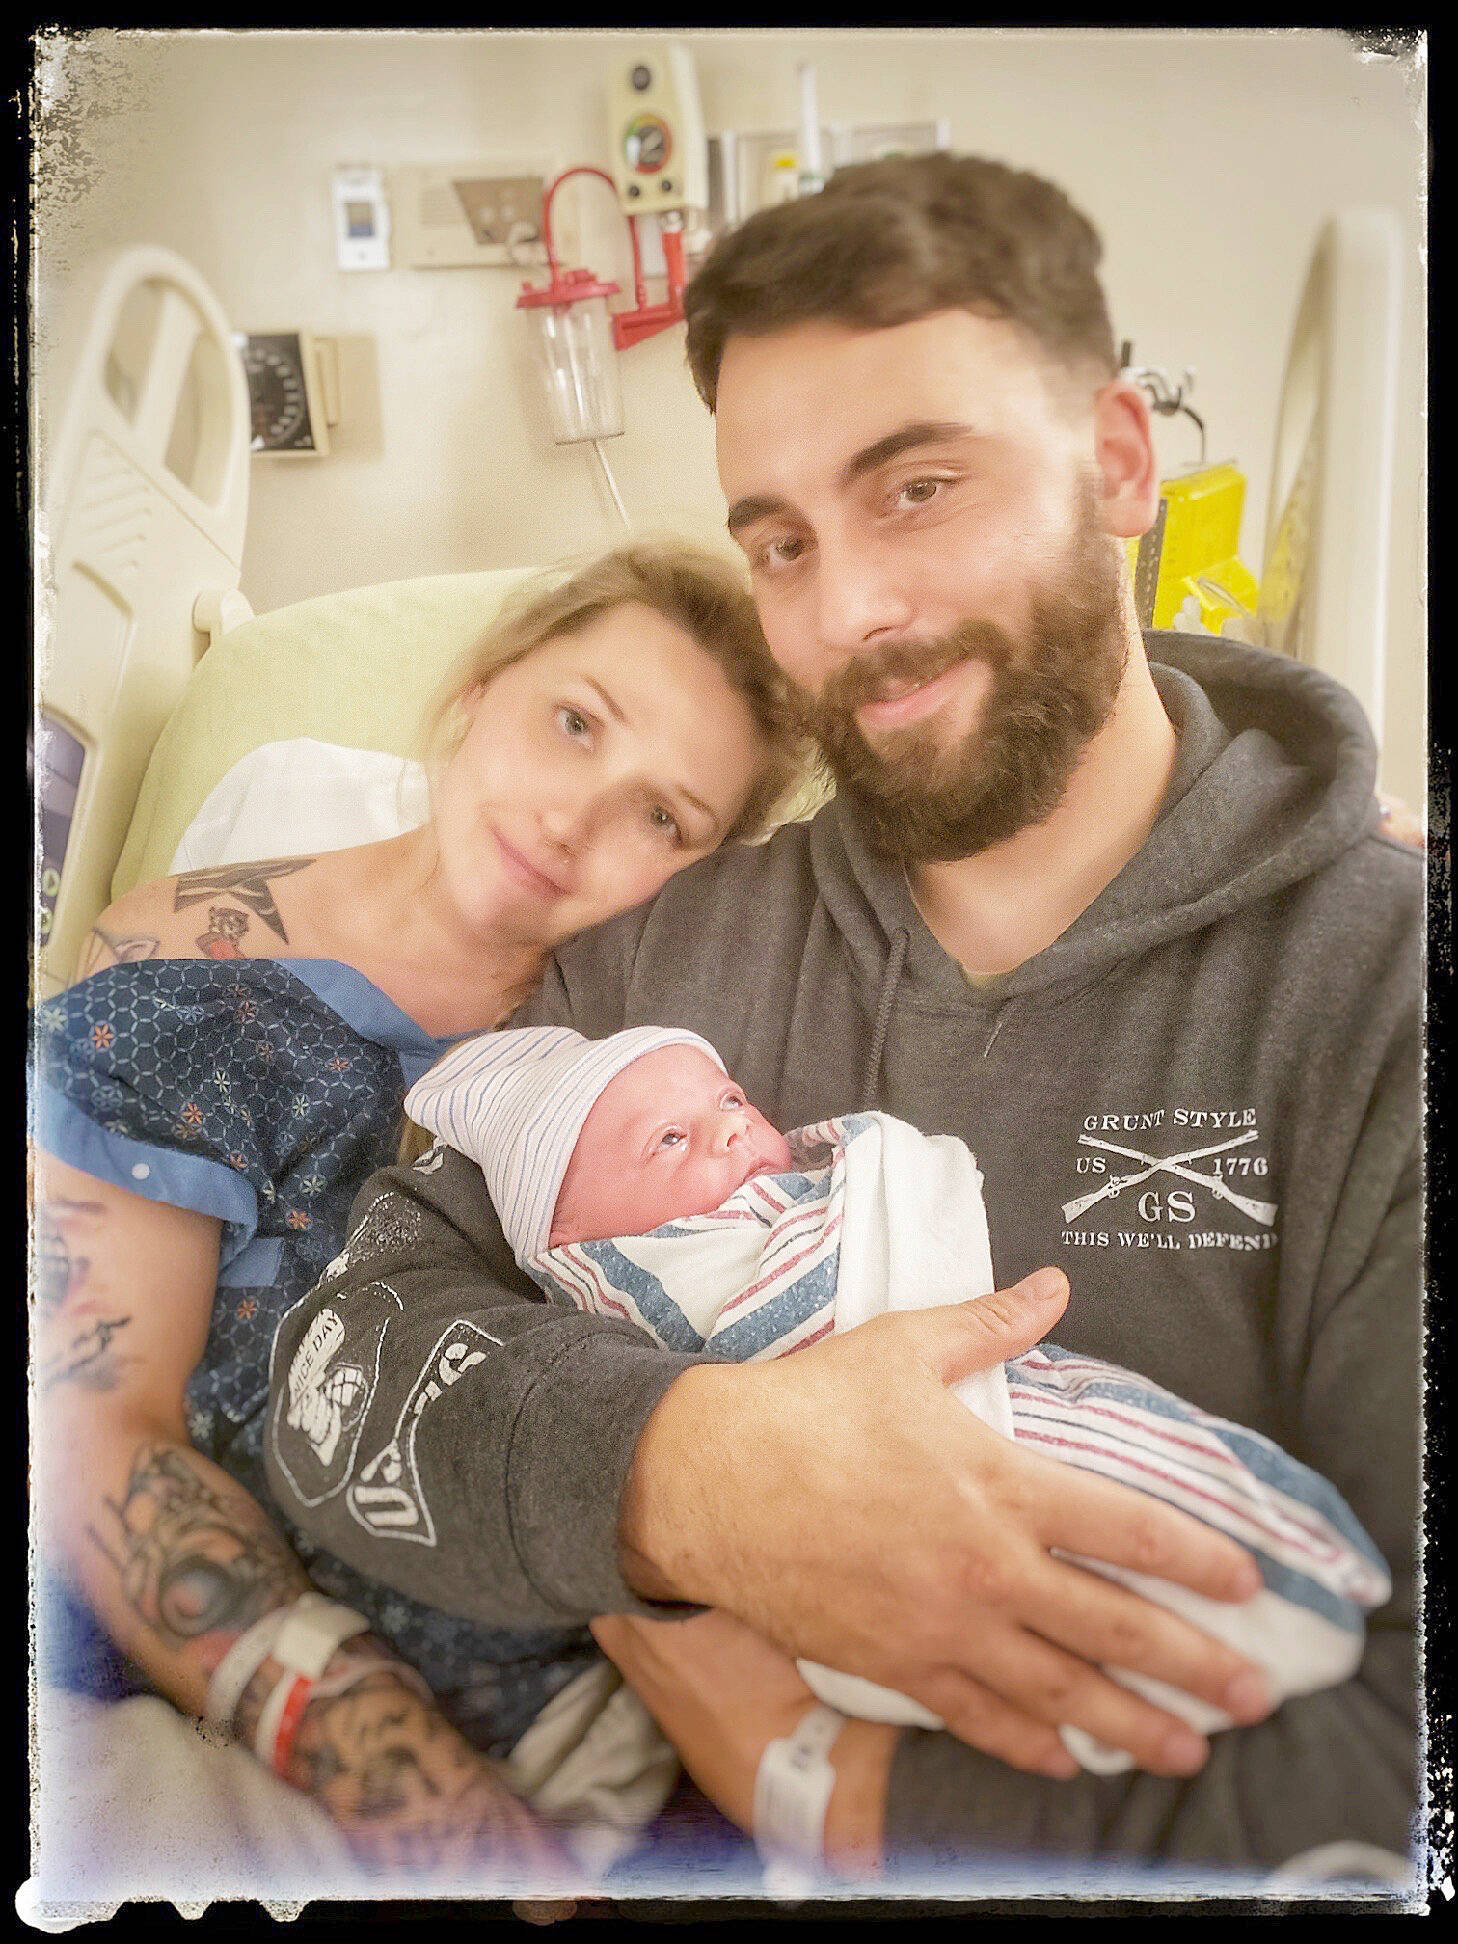 Contributed photos
Anthony Stephens and Kirsten Walter welcomed the first San Juan baby of 2022 to the world Jan. 7.